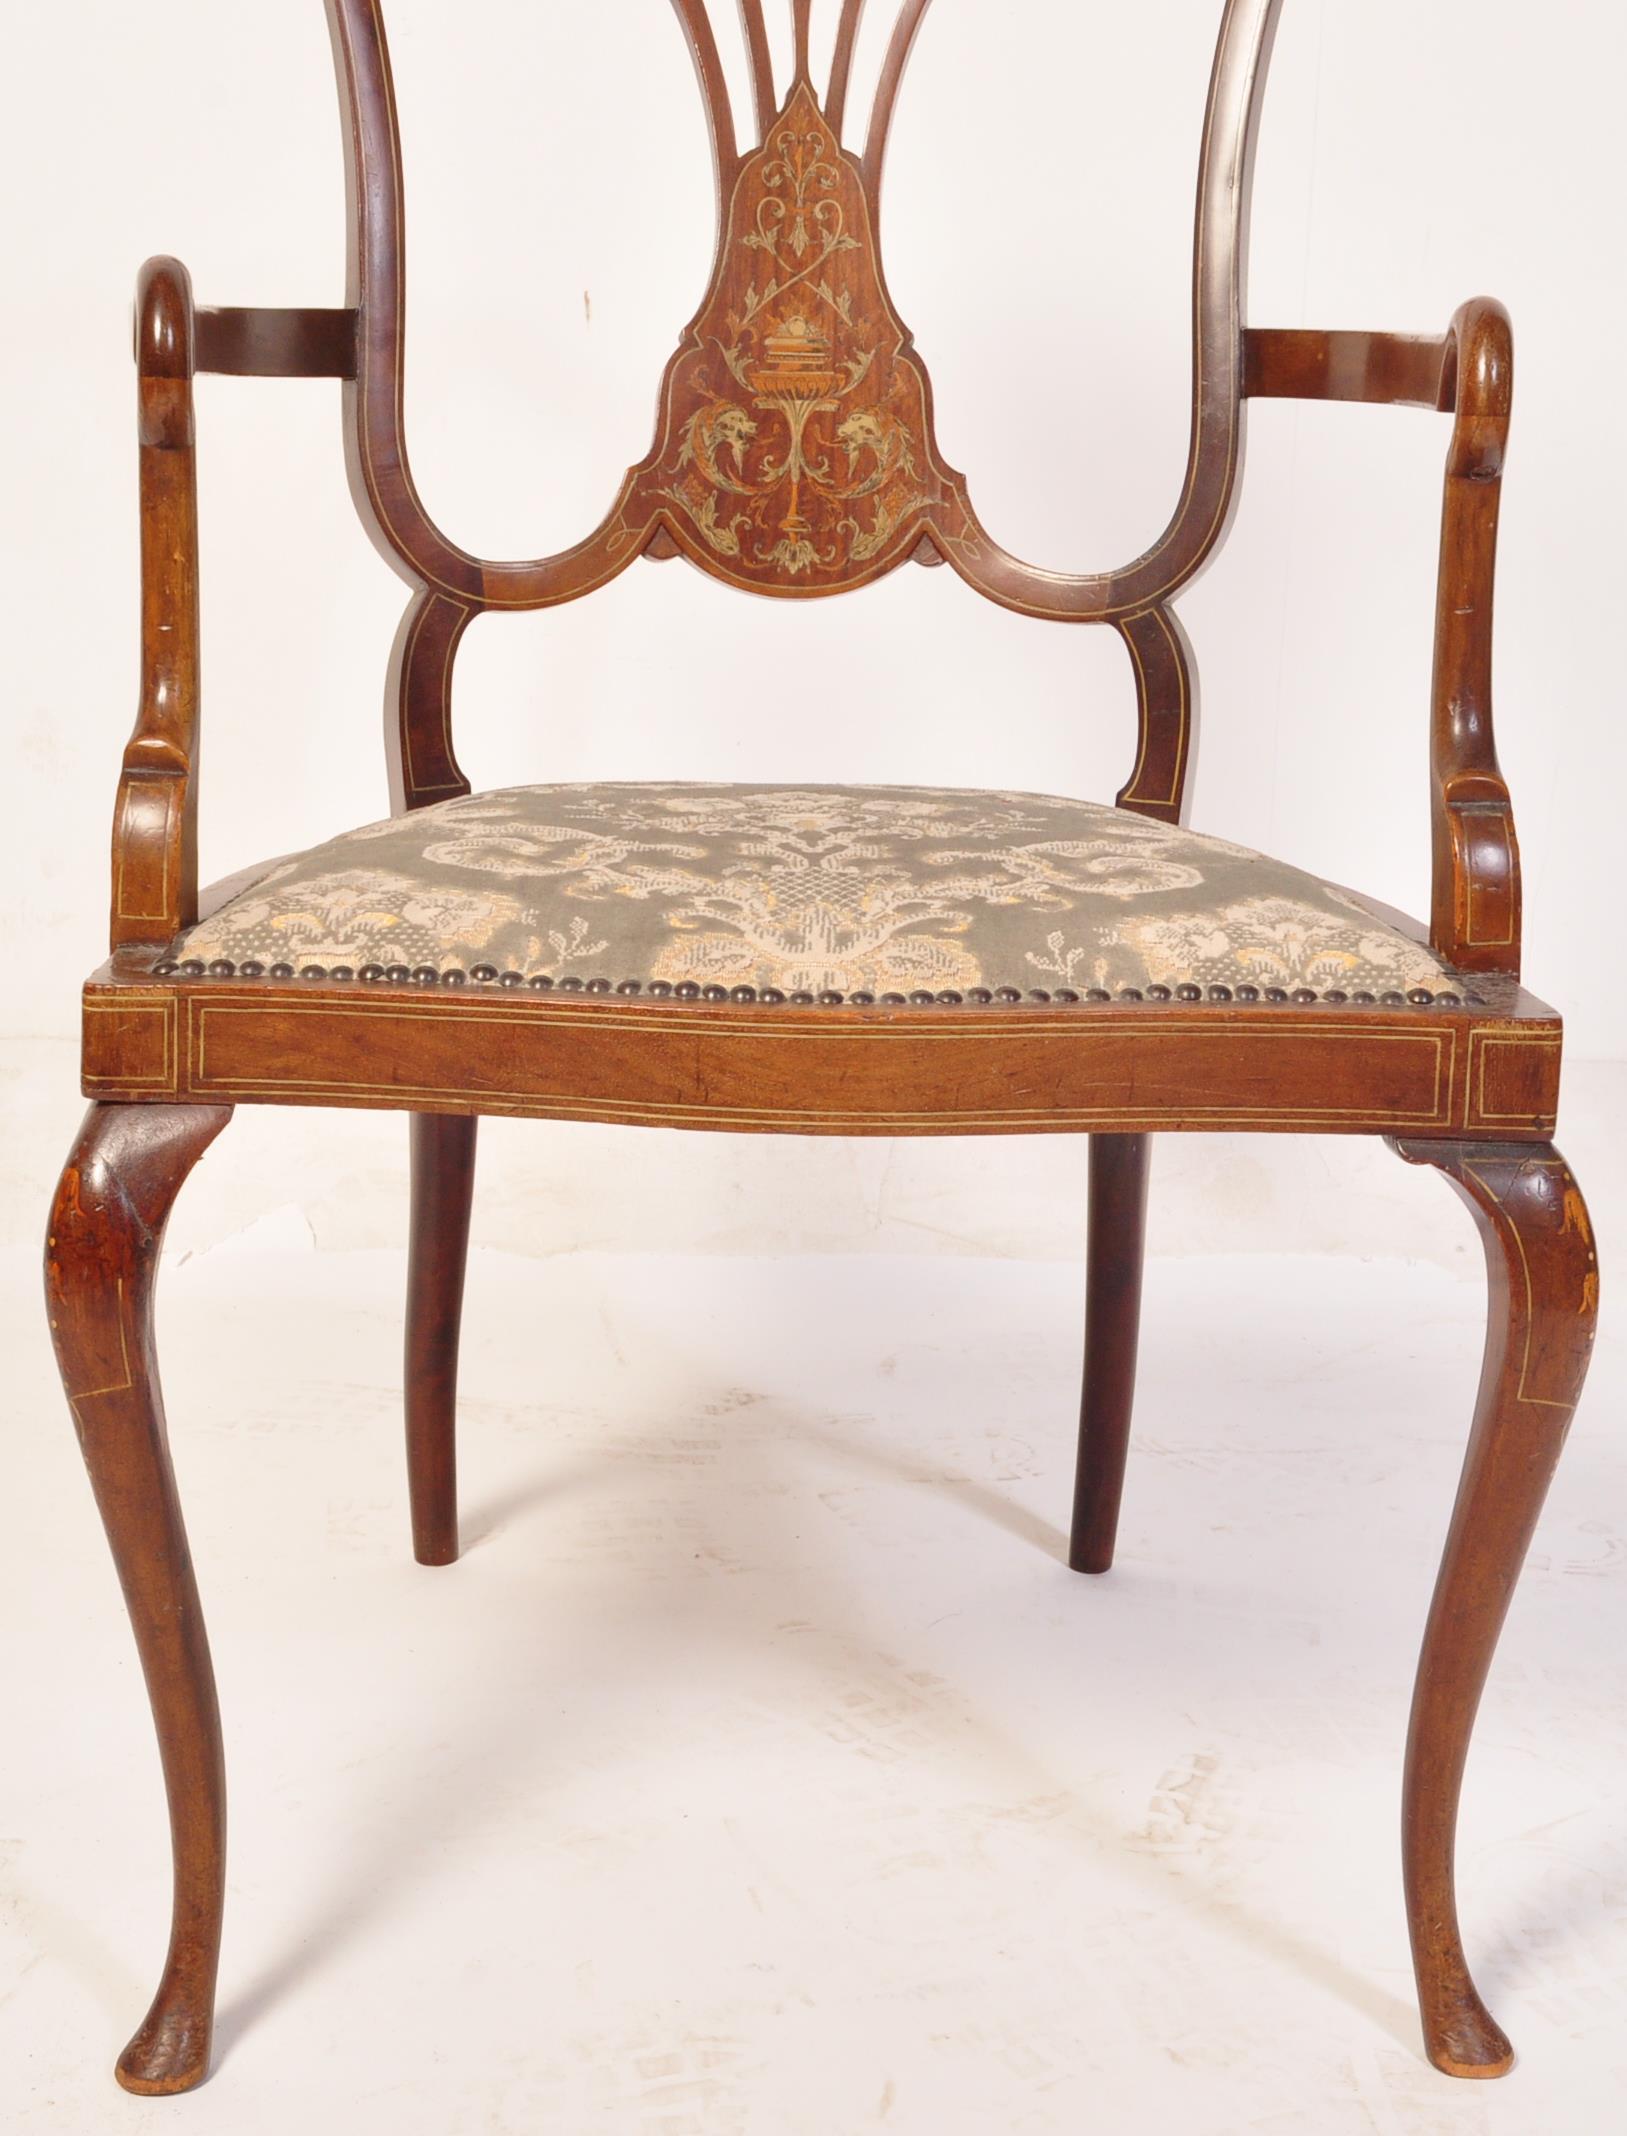 EDWARDIAN MAHOGANY AND MARQUETRY INLAID ARMCHAIR - Image 3 of 4